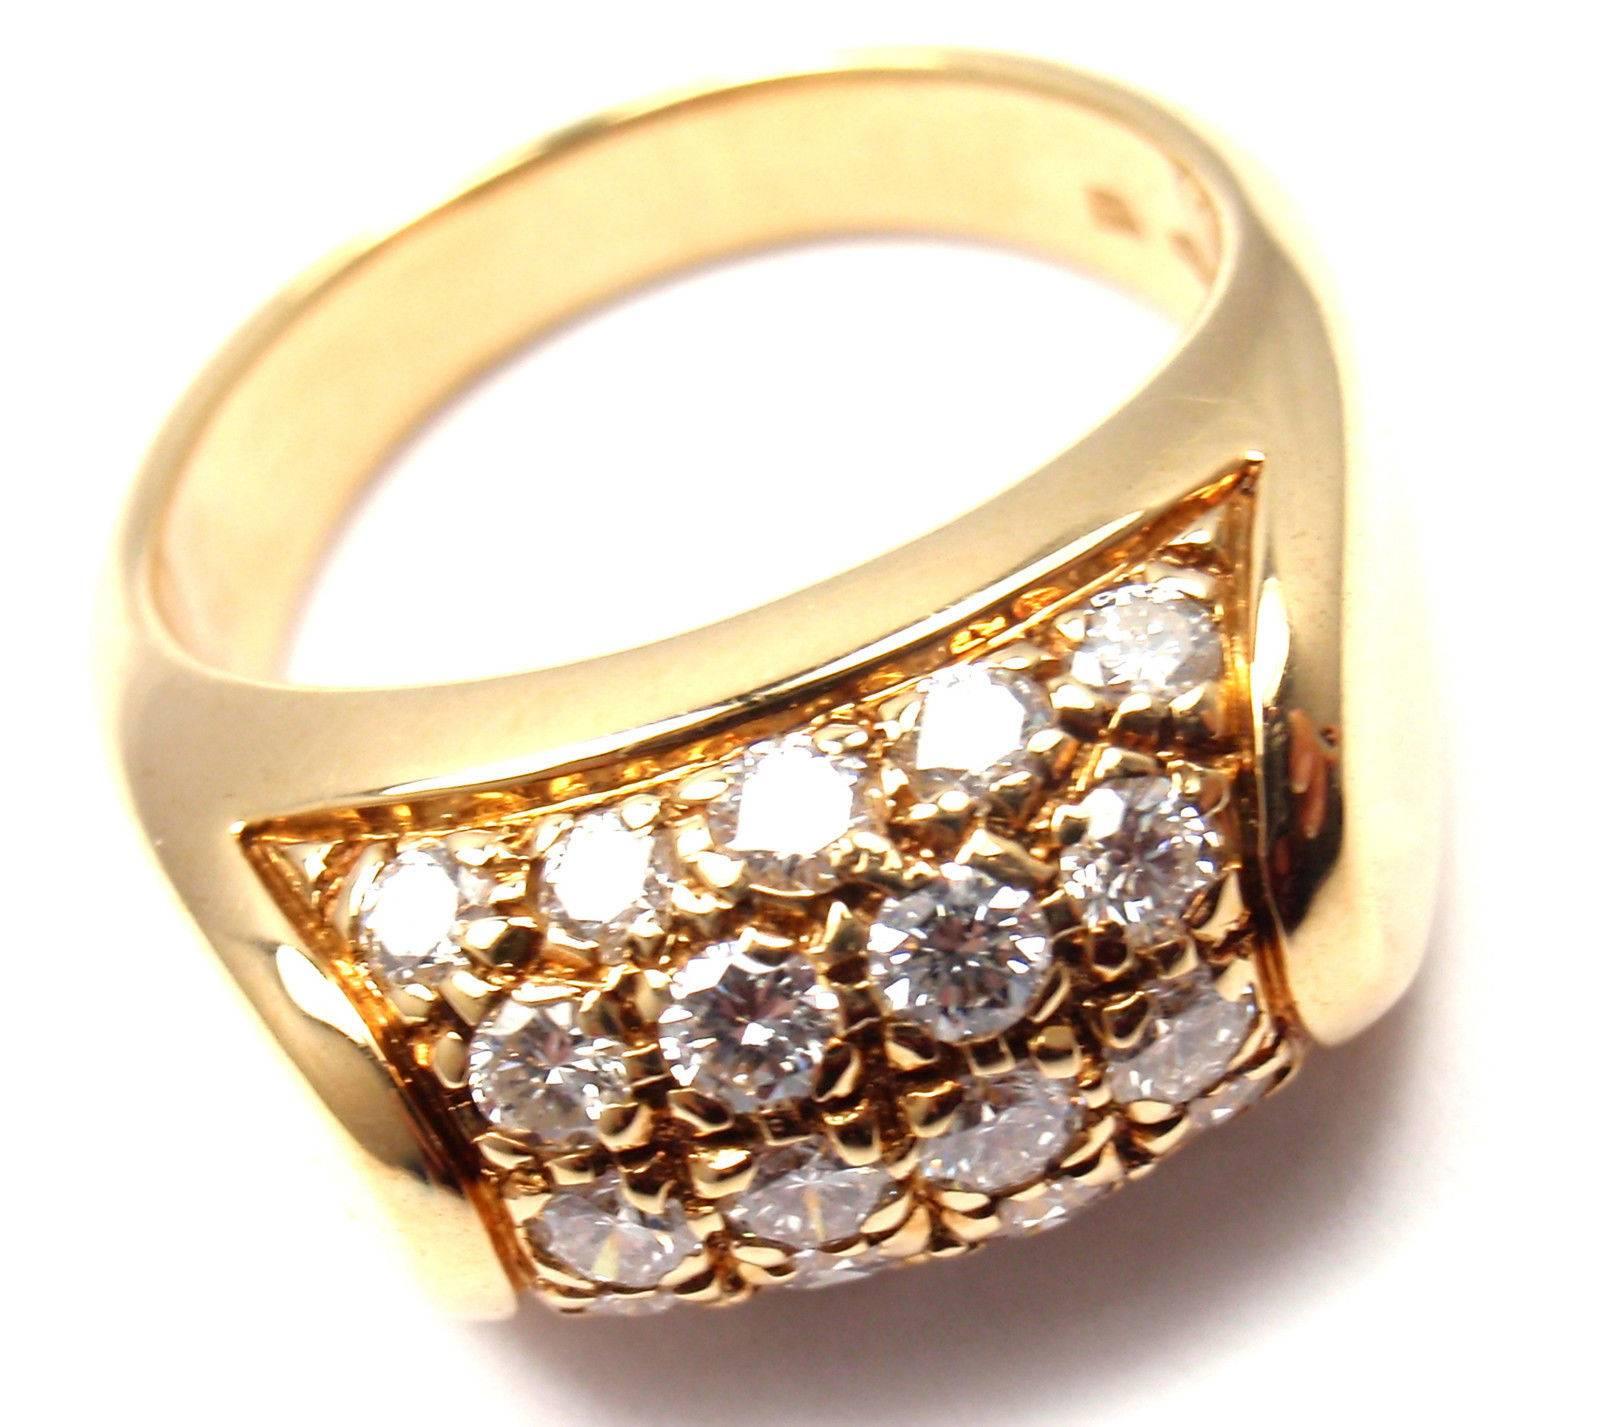 18k Yellow Gold Diamond Band Ring by Bulgari.
With 37 round brilliant cut diamonds VS1 clarity, G color total weight approx. .75ct
Details:
Ring Size: 6
Weight: 9.2 grams
Width: 10mm
Stamped Hallmarks: Bvlgari 750 Made In Italy
*Free Shipping within